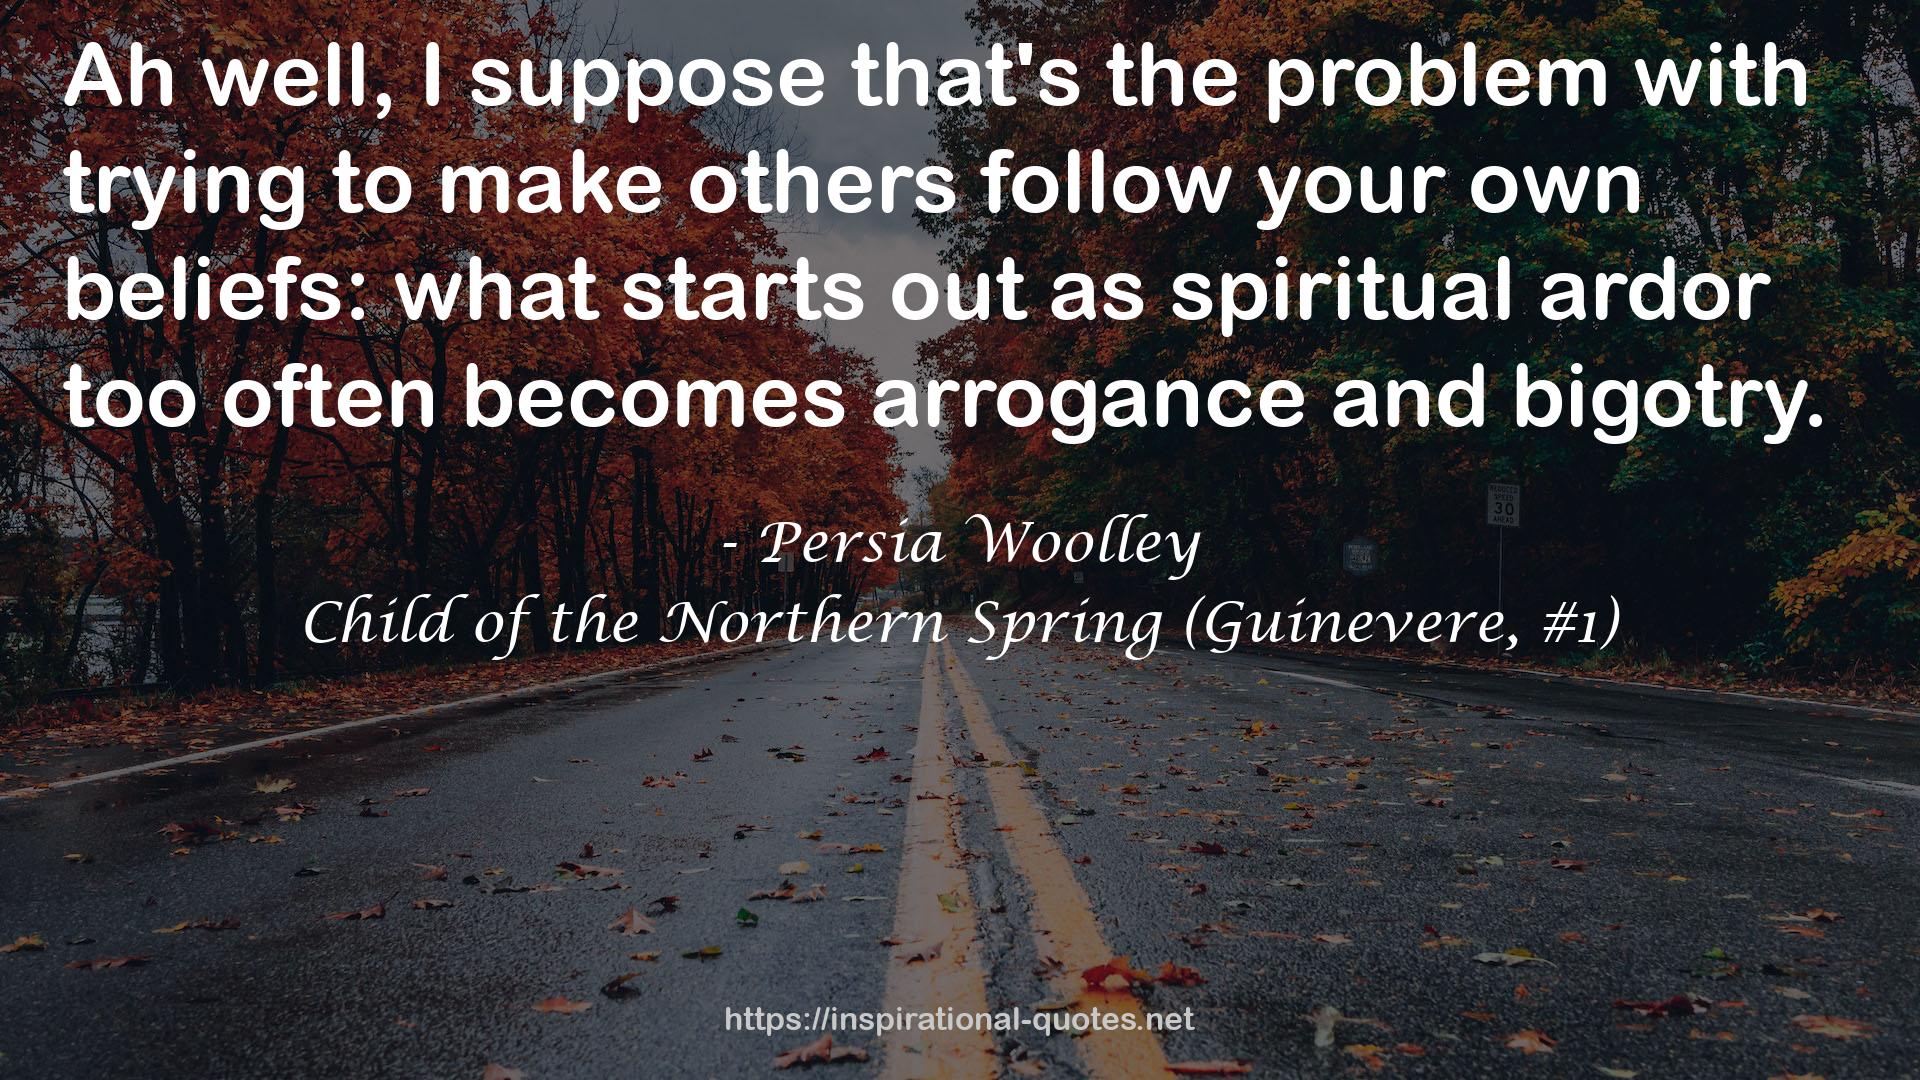 Persia Woolley QUOTES